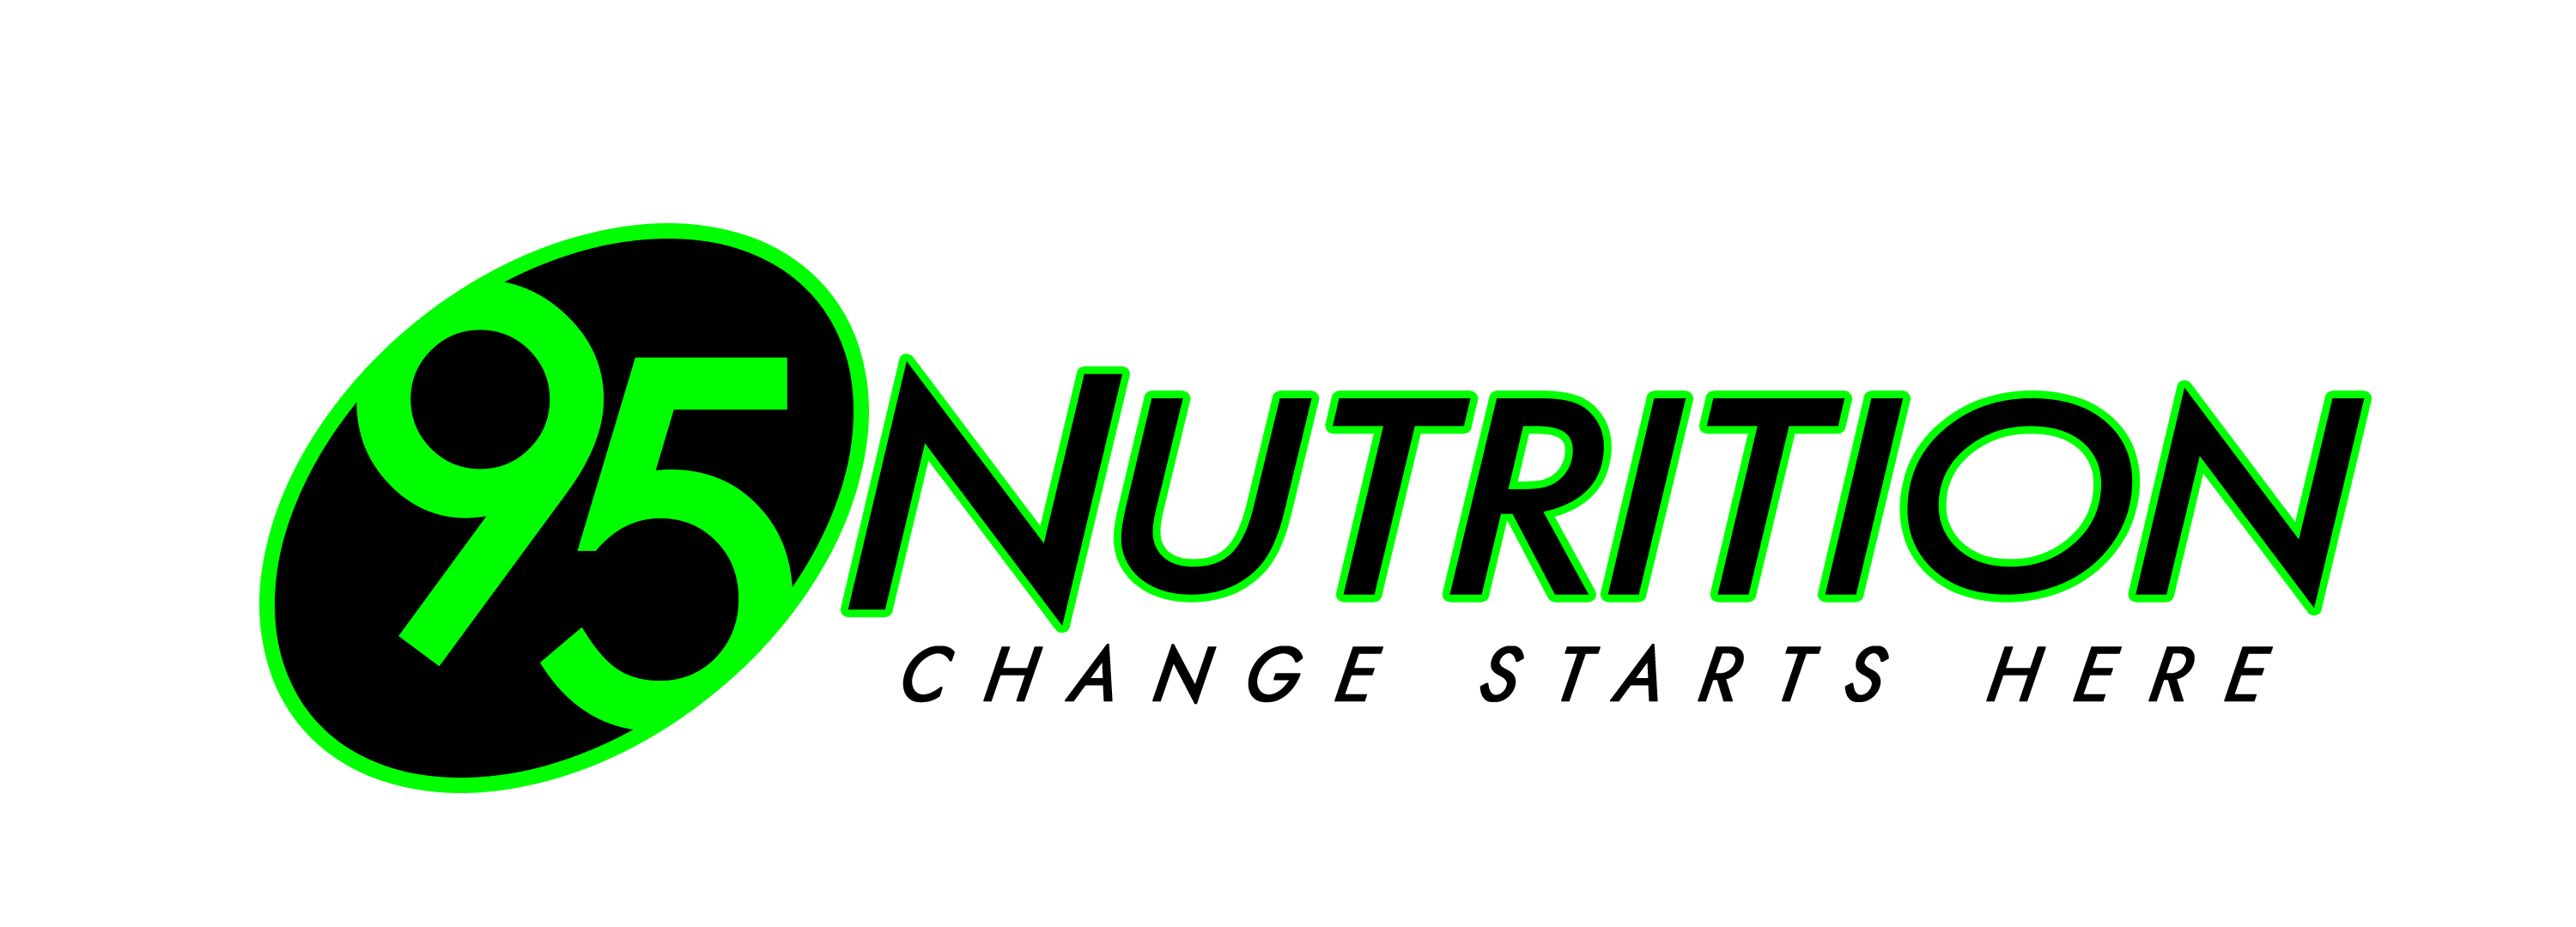 95 Nutrition